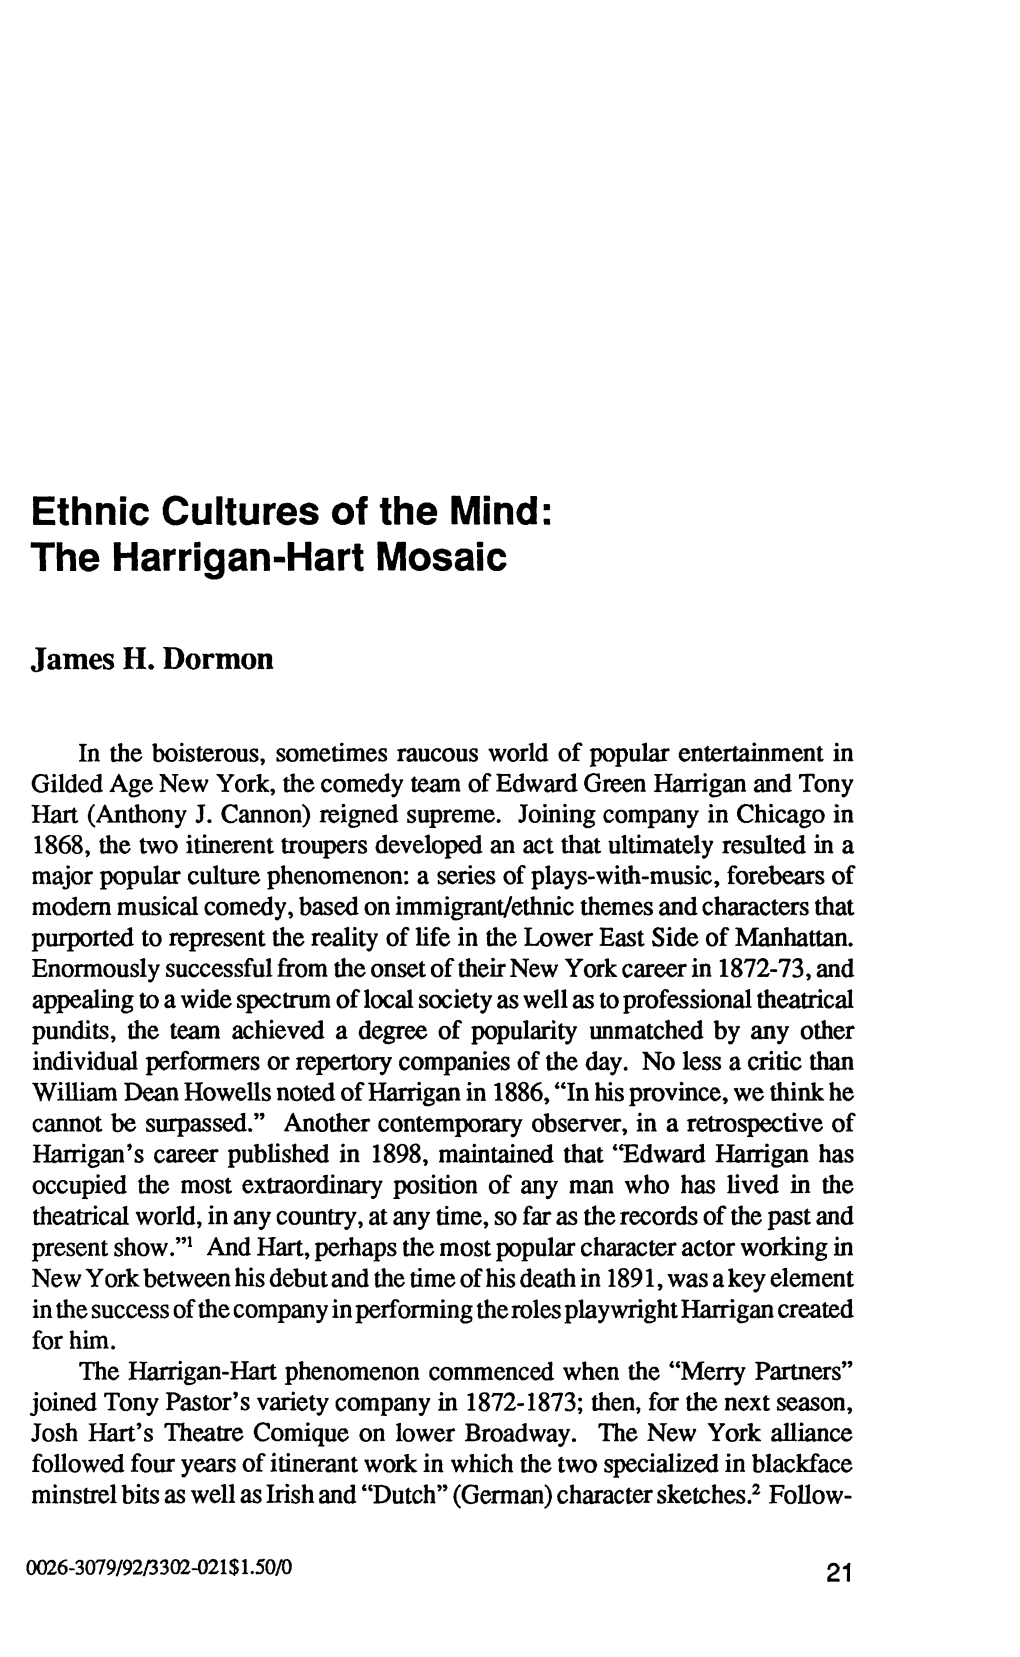 Ethnie Cultures of the Mind: the Harrigan-Hart Mosaic